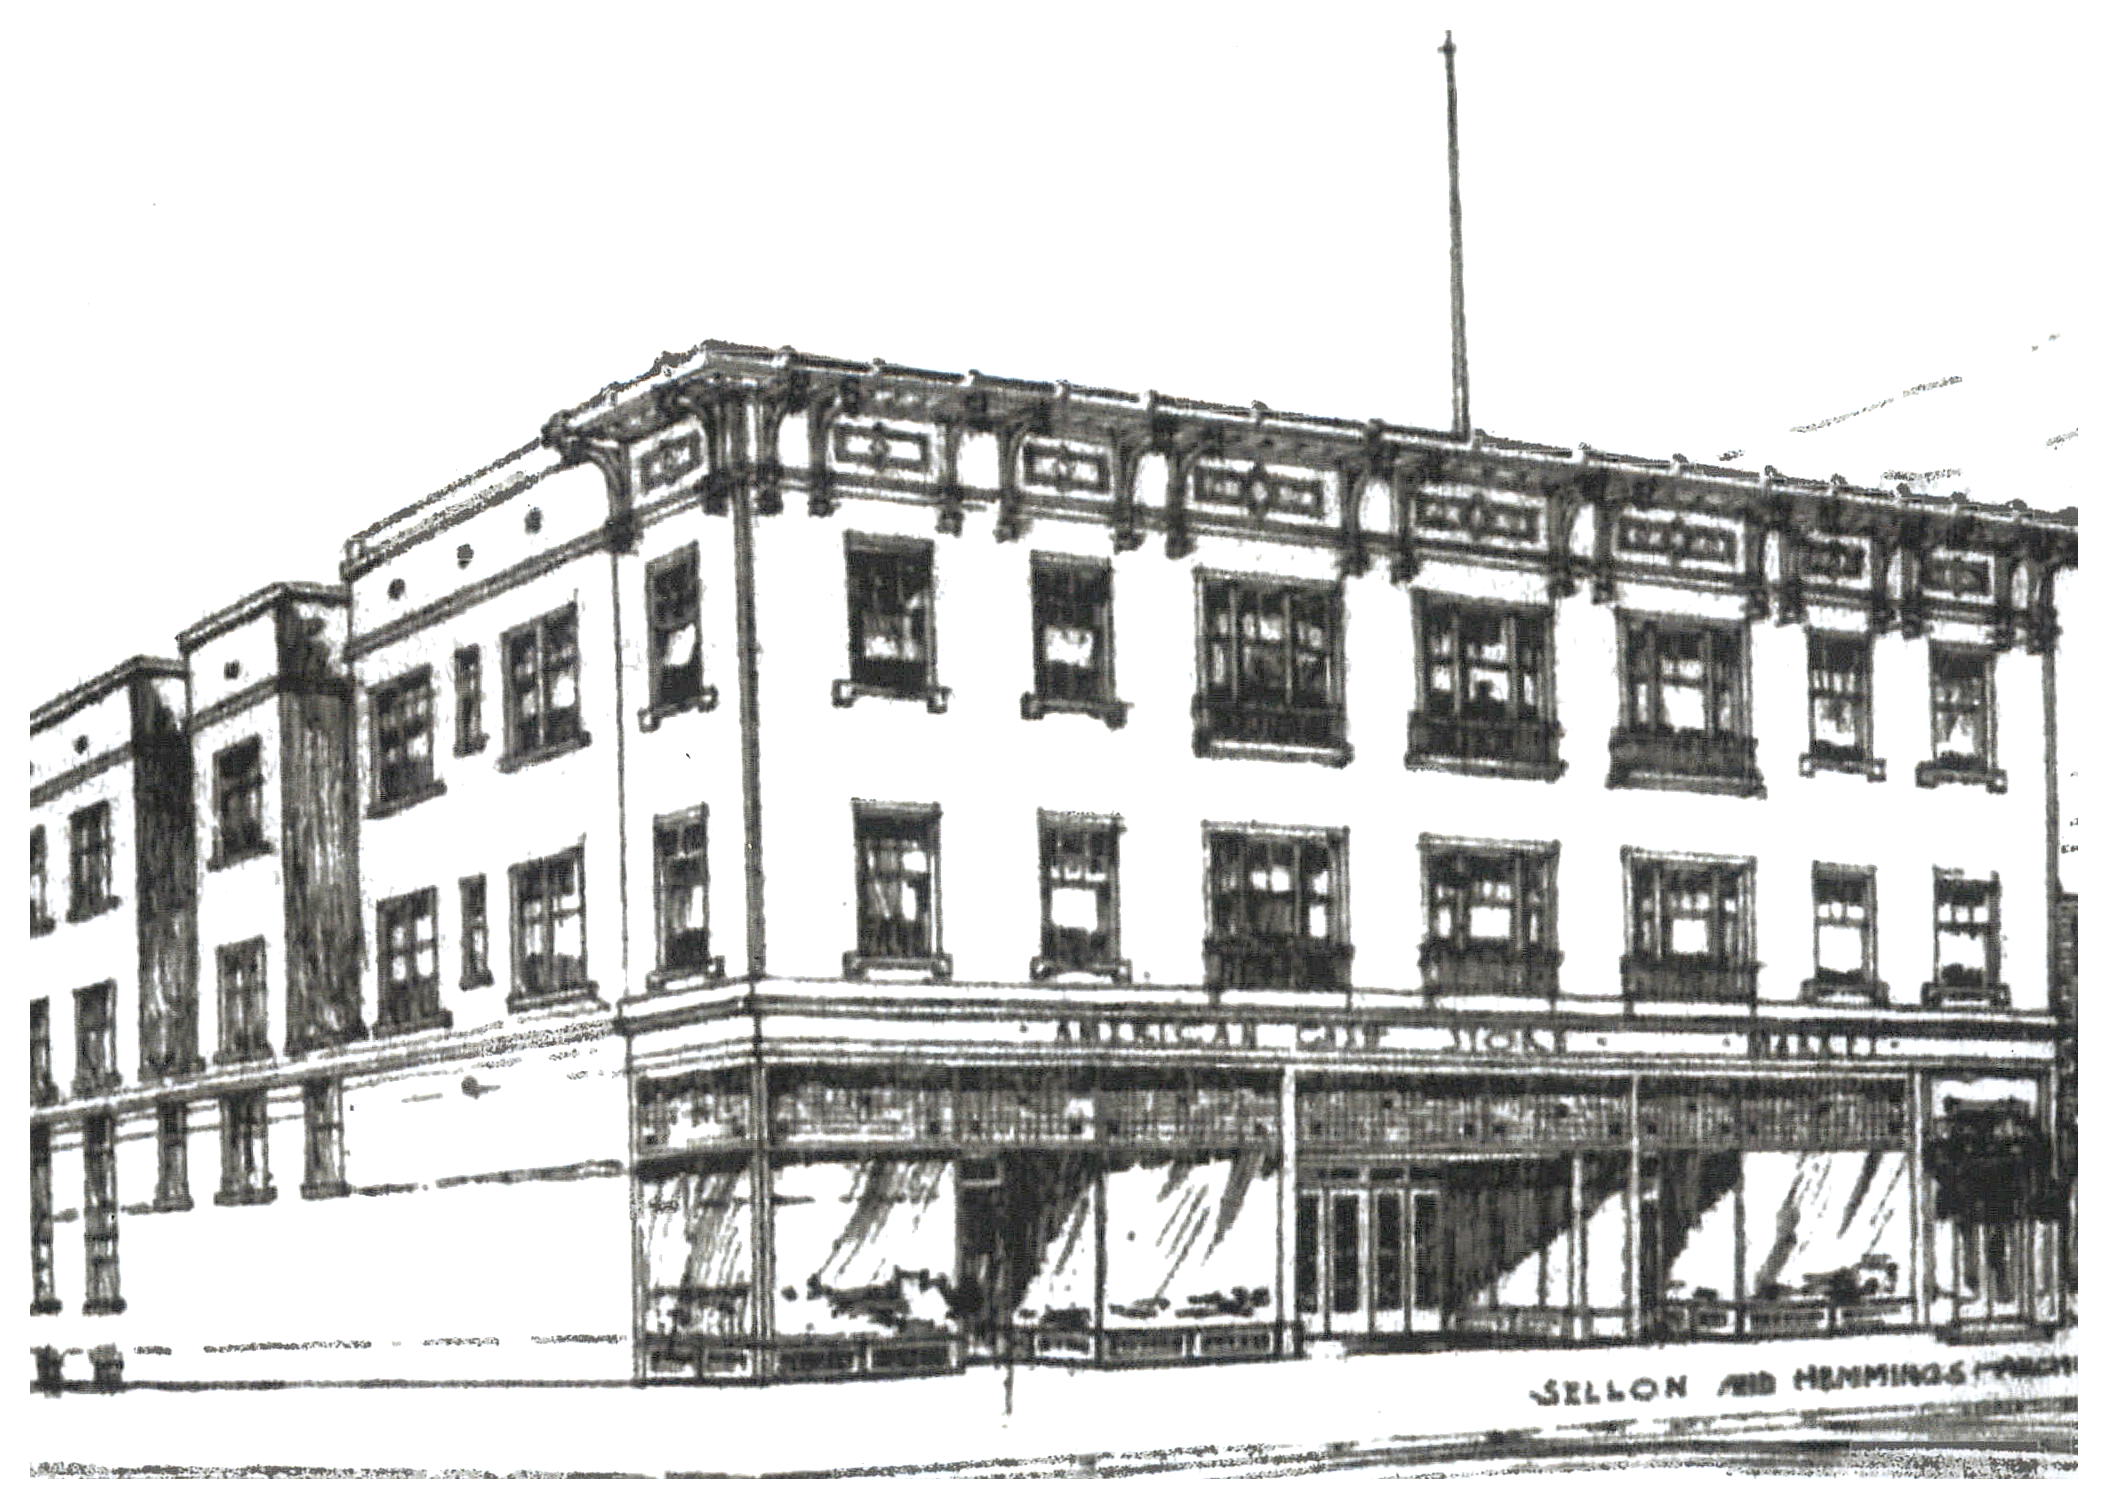 Before: rendering of the building from the original architect.